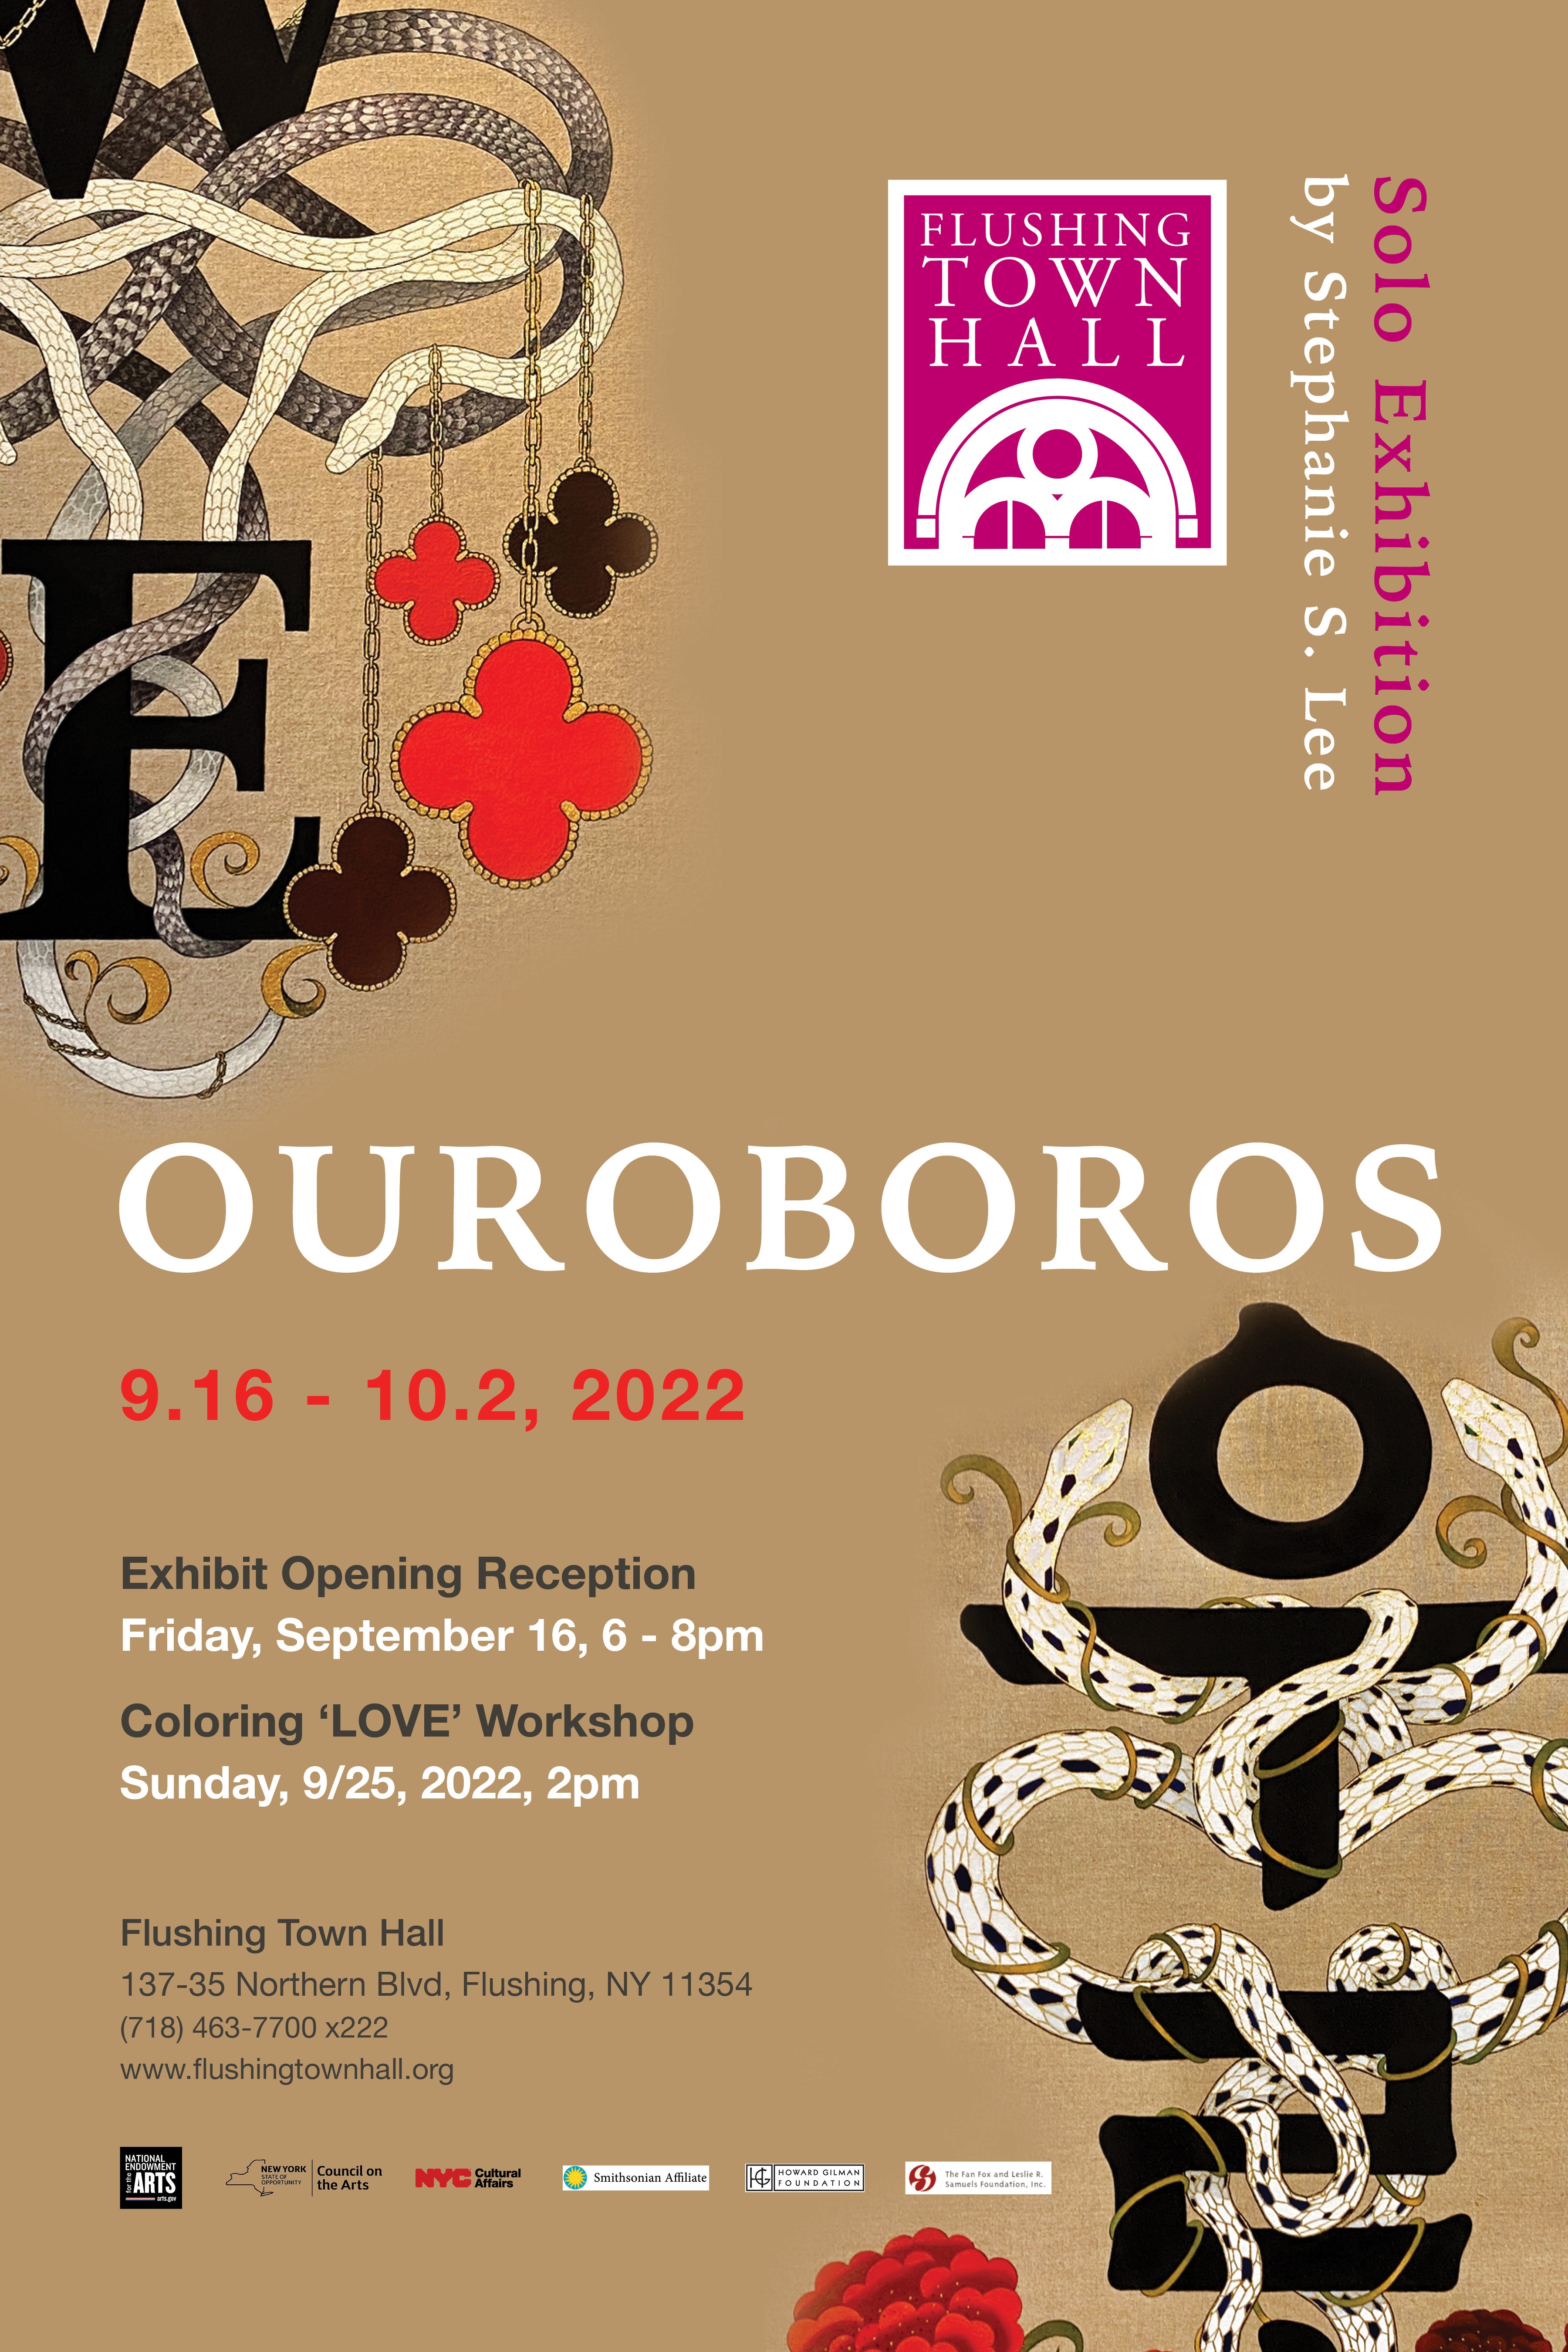 [SEP 16 - OCT 2] OUROBOROS - Stephanie S. Lee’s Solo Exhibition at Flushing Town Hall